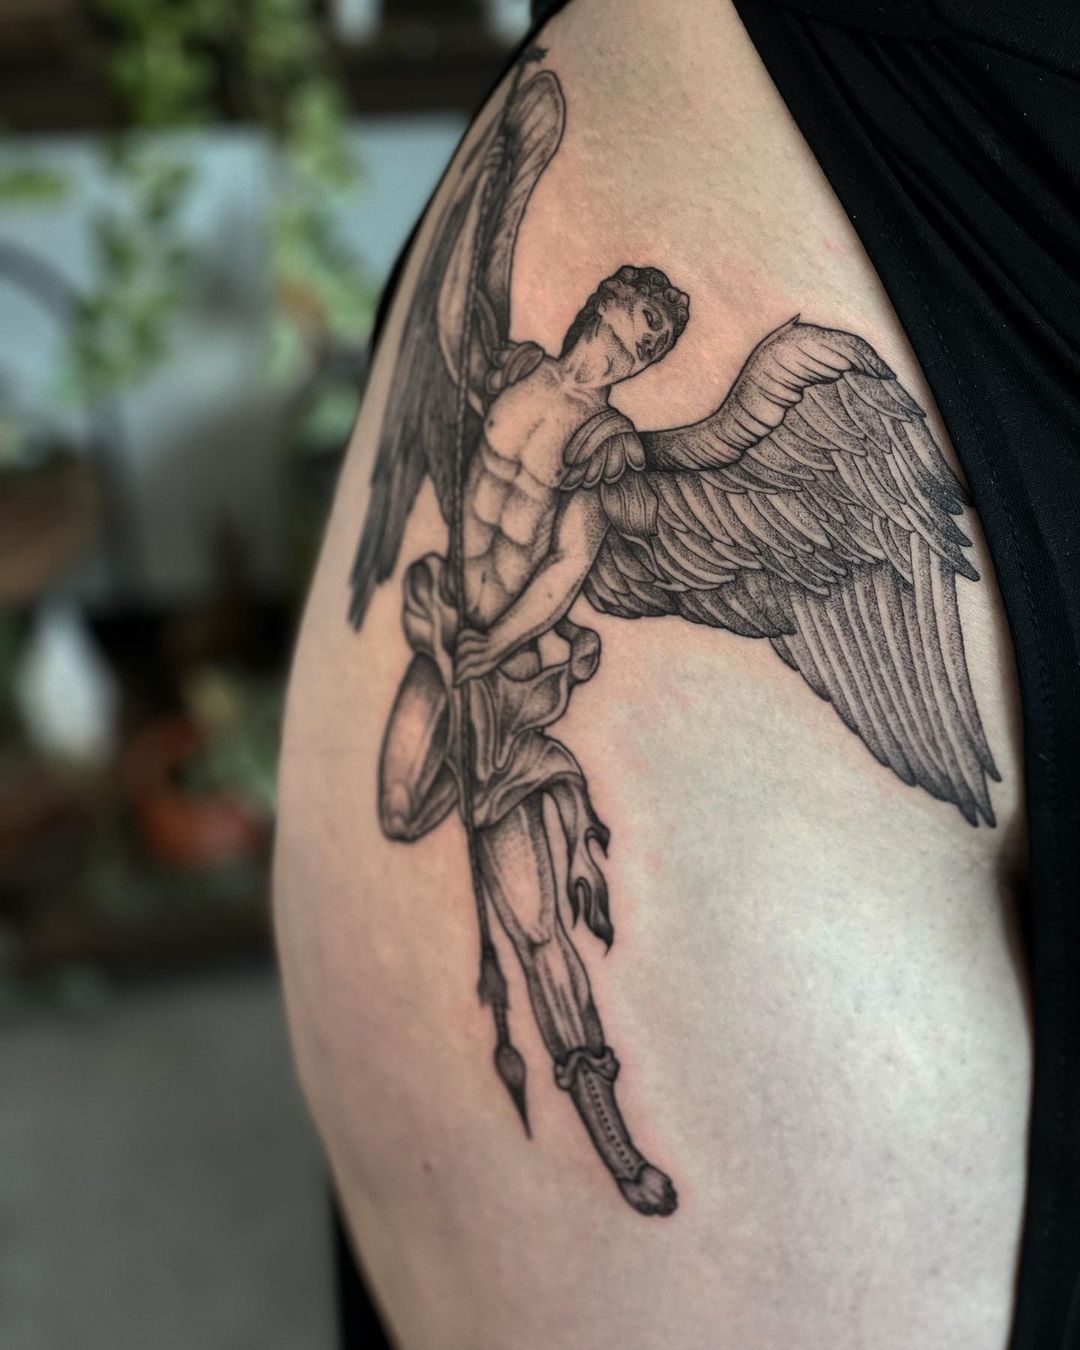 Archangel Michael tattoo located on the forearm black